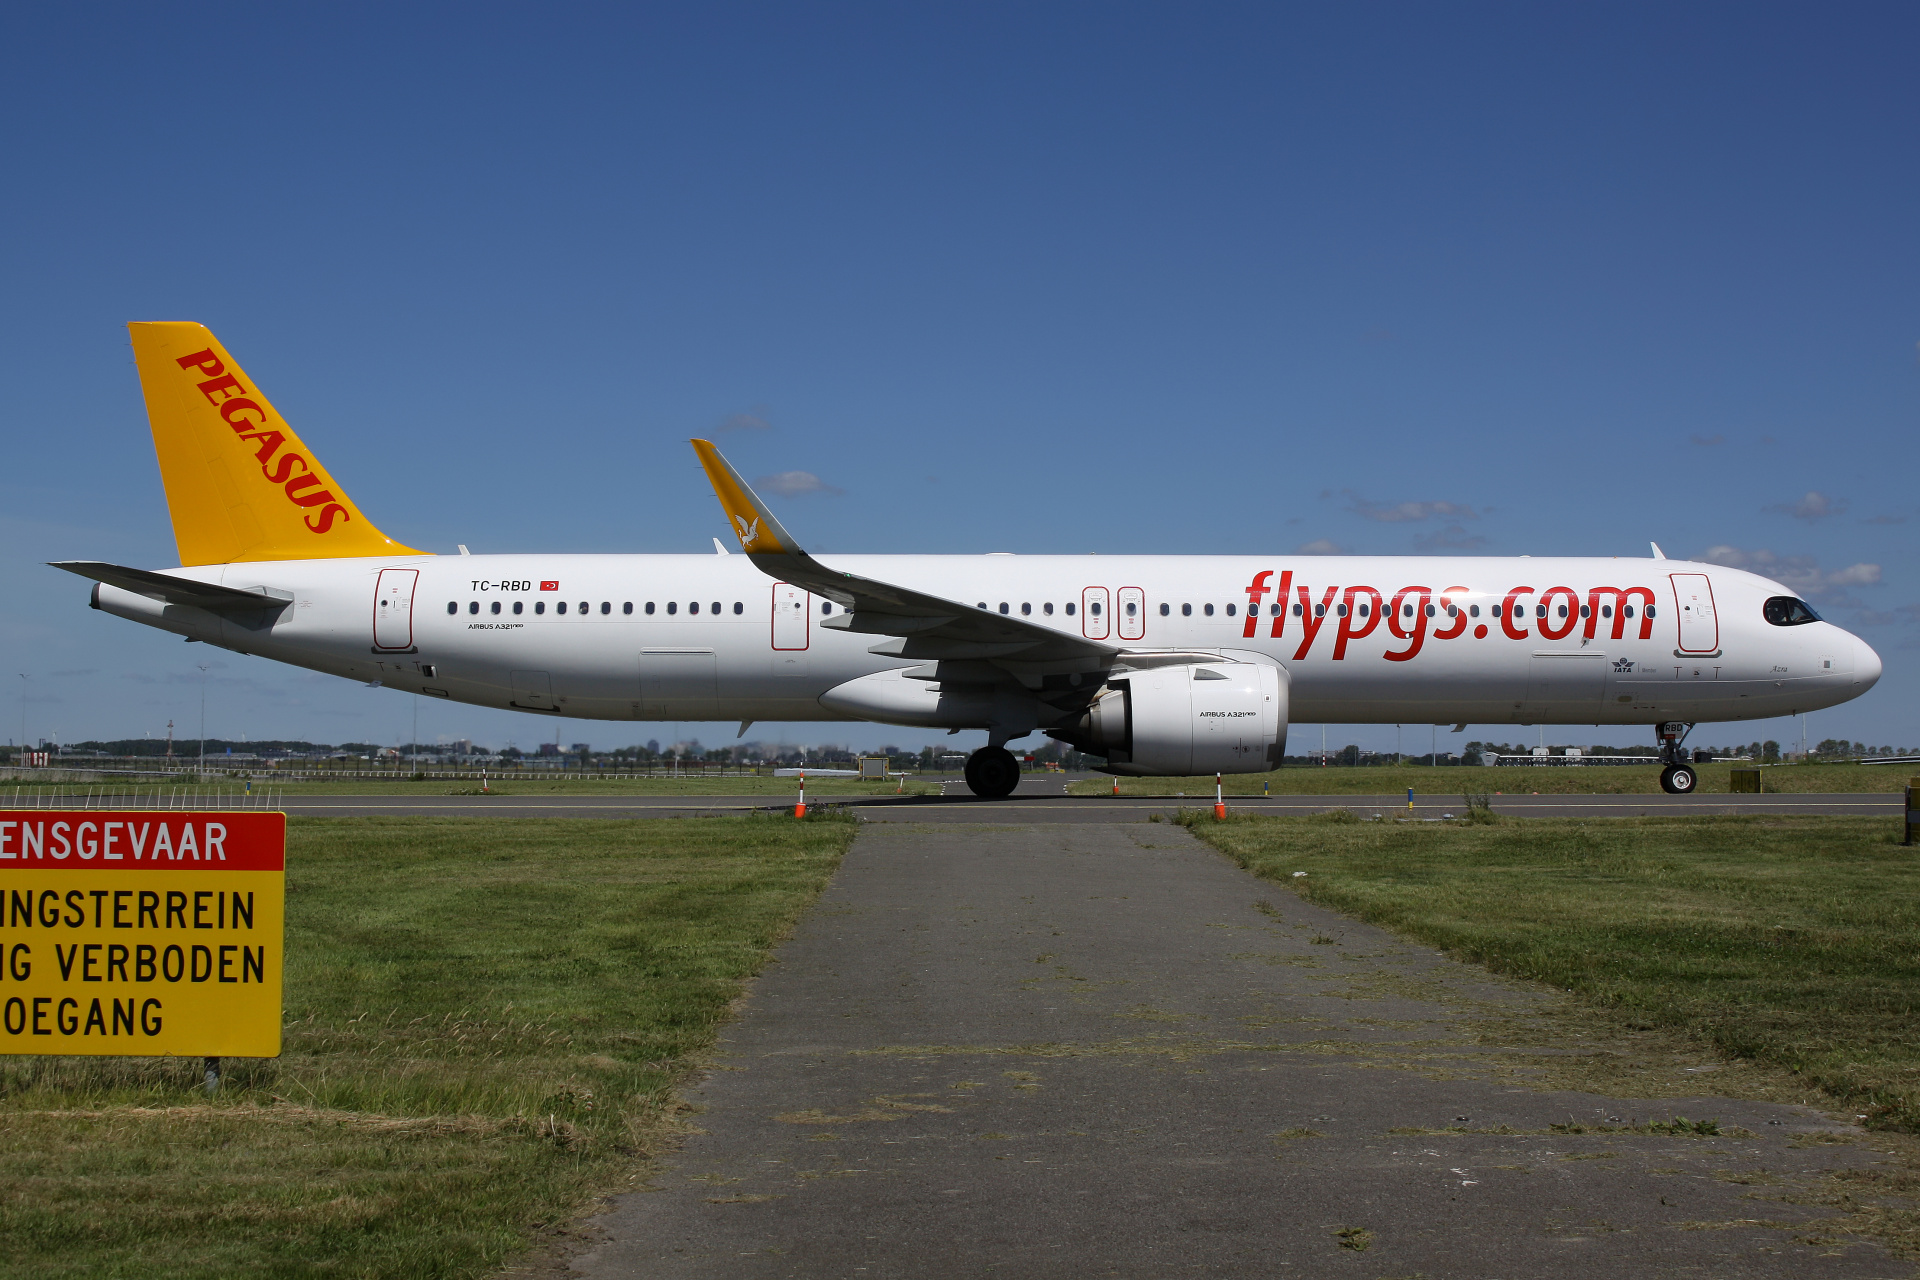 TC-RBD, Pegasus Airlines (Aircraft » Schiphol Spotting » Airbus A321neo)